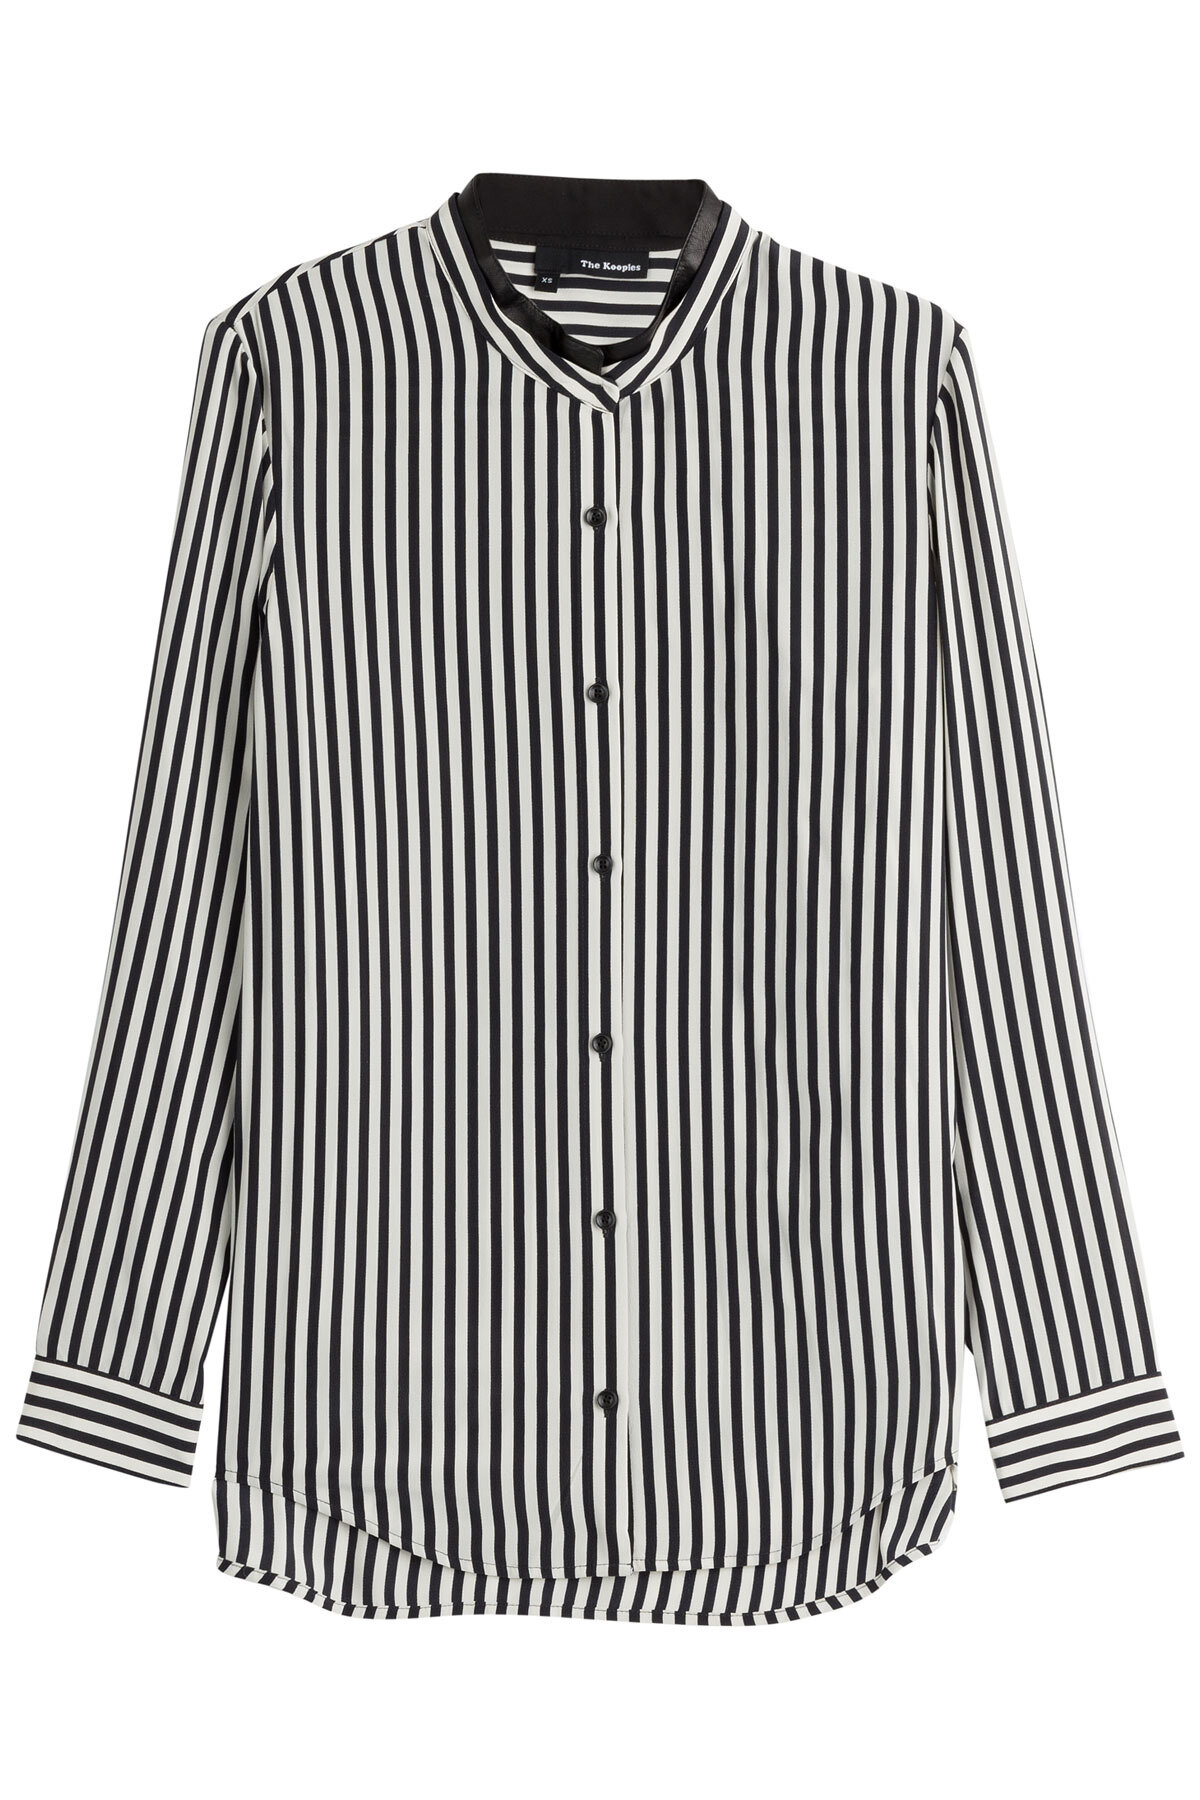 The Kooples Stripe Silk Blouse With Leather Trimmed Collar.jpg